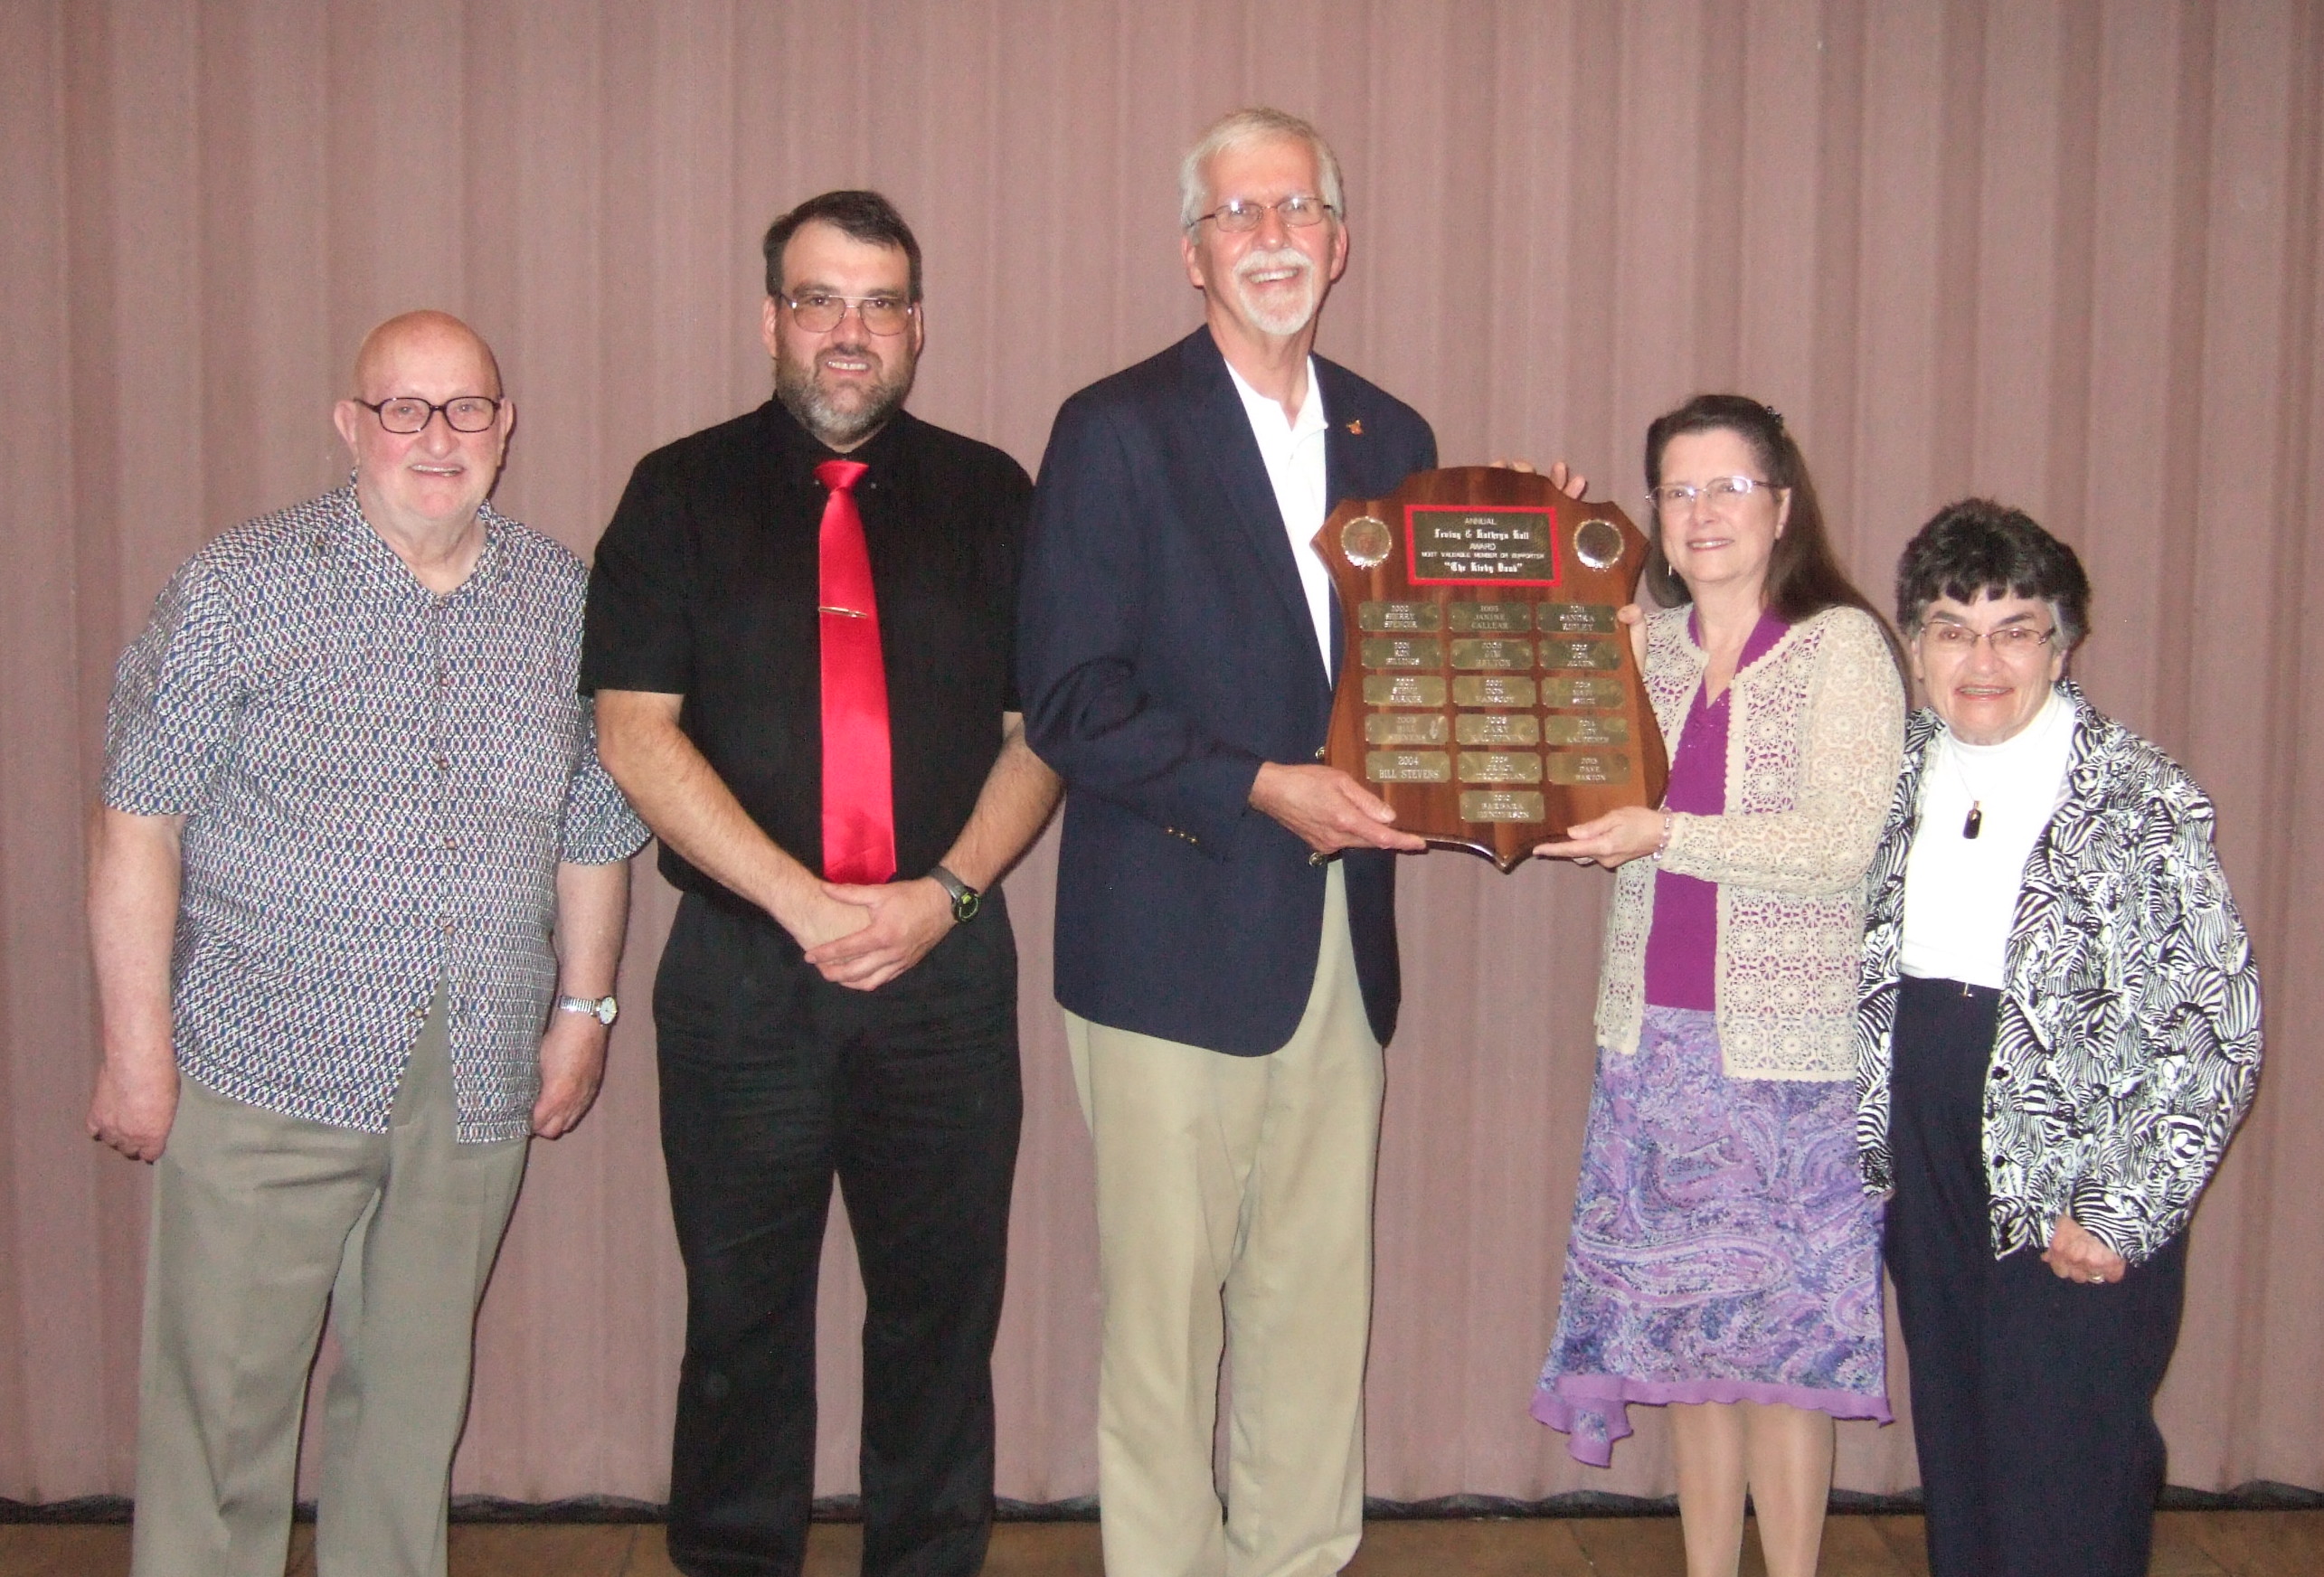 Kirby Band holds annual dinner